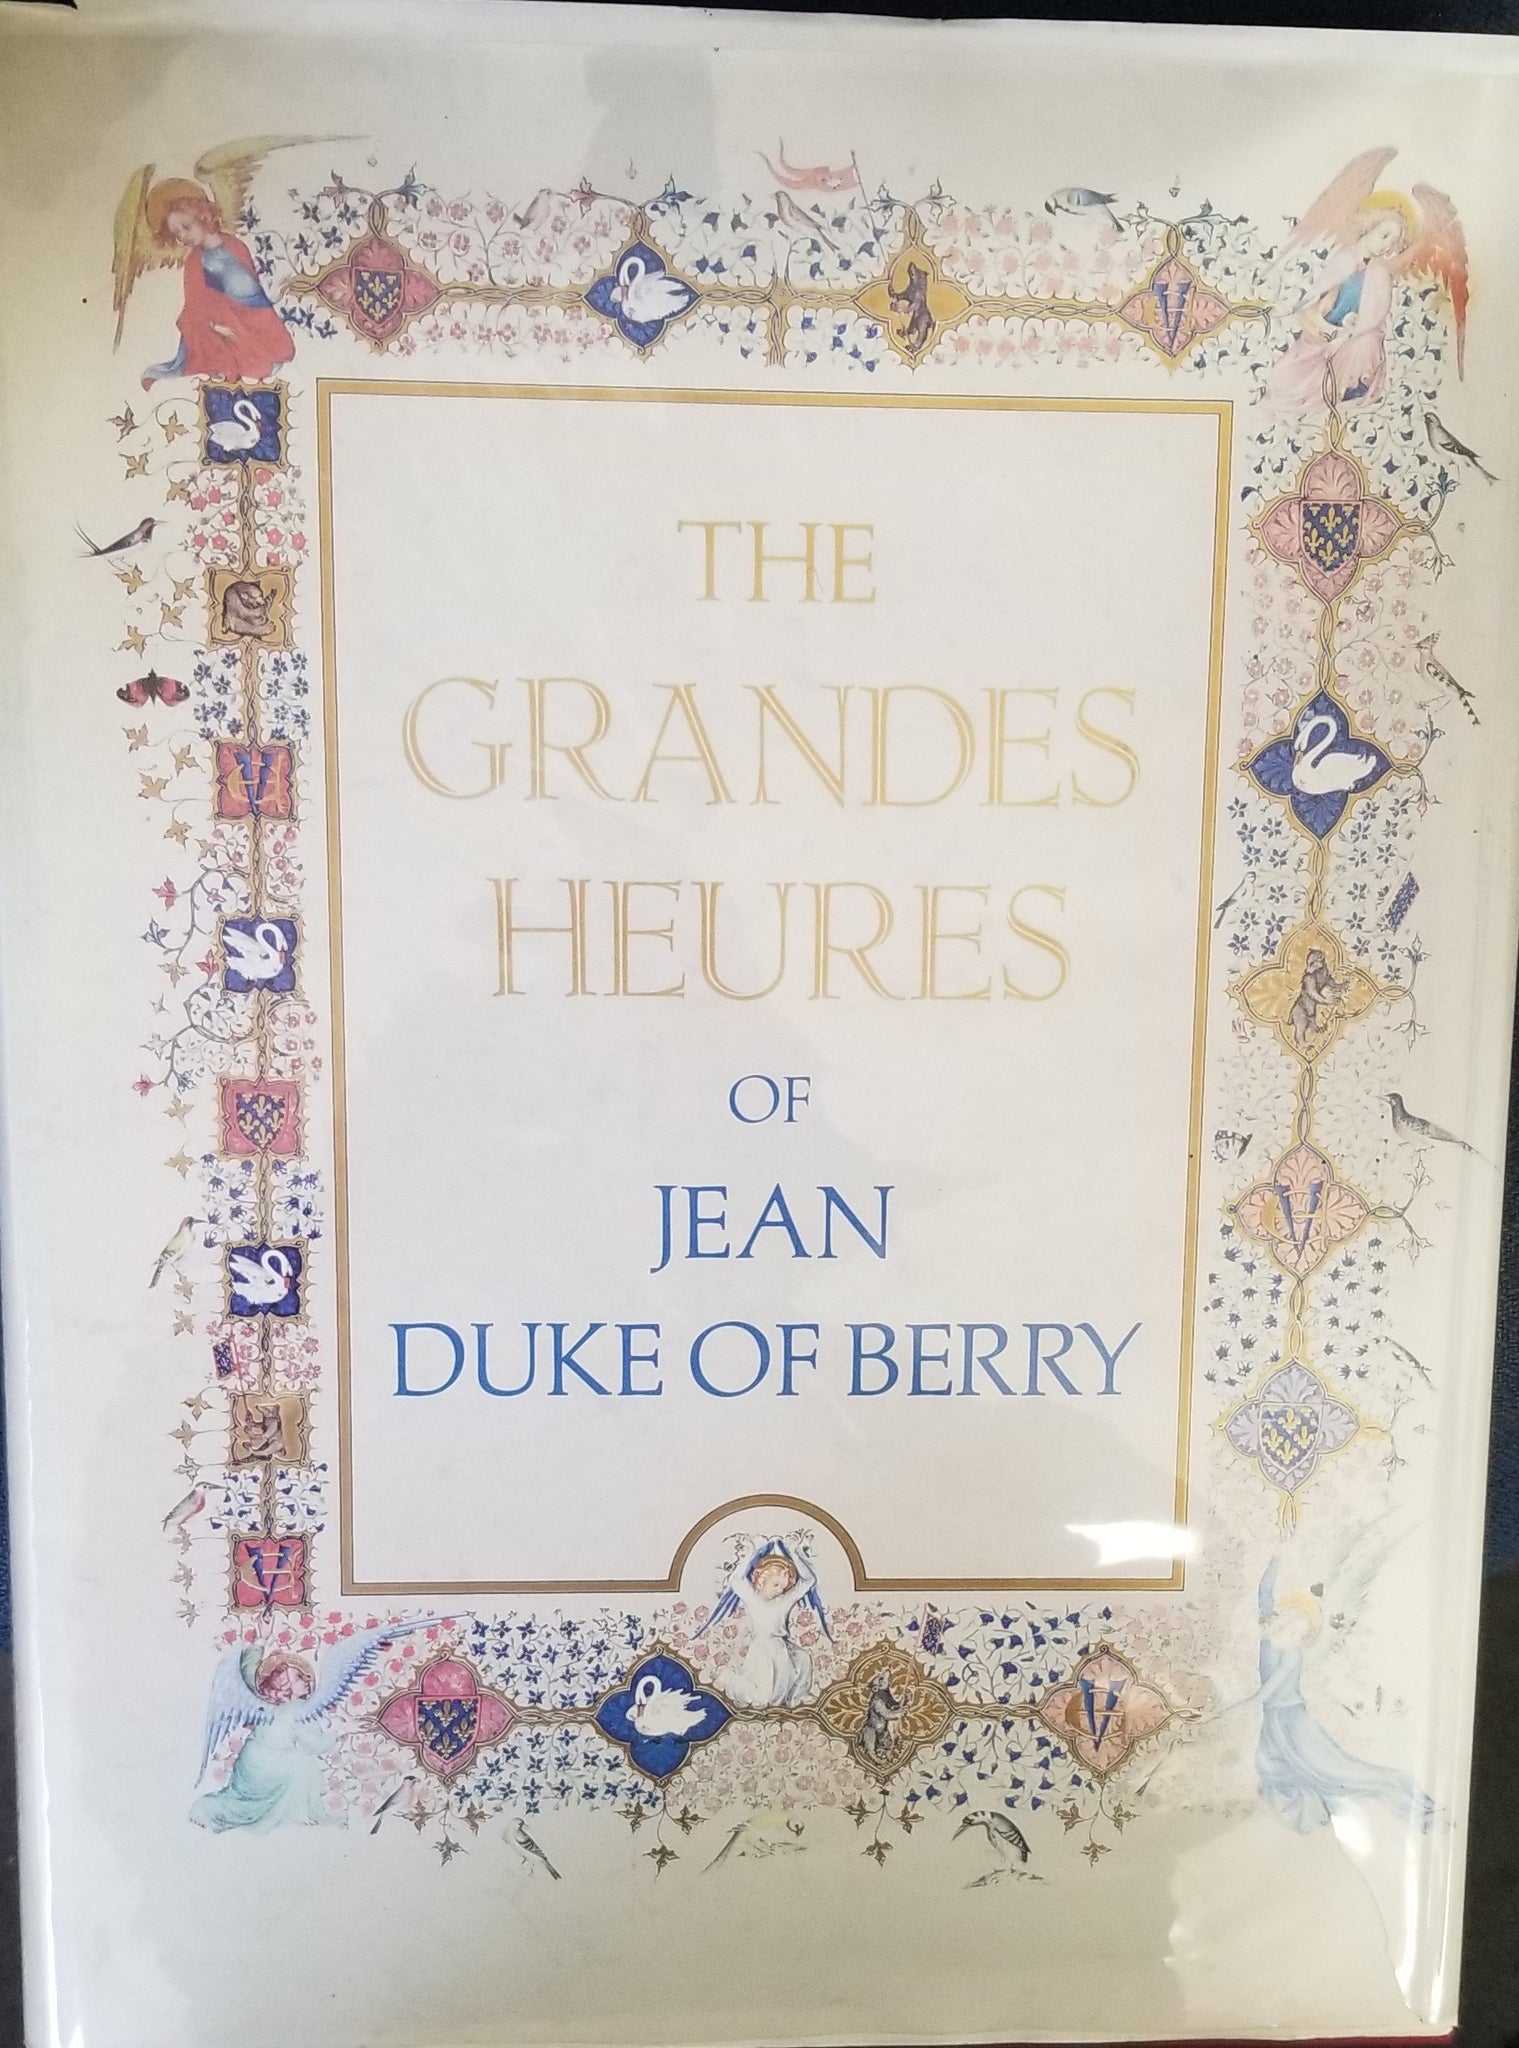 THE GRANDES HEURES OF JEAN, DUKE OF BERRY Bibliotheque Nationale, Paris  by Berry, Jean Duke Of - Introduction by Marcel Thomas